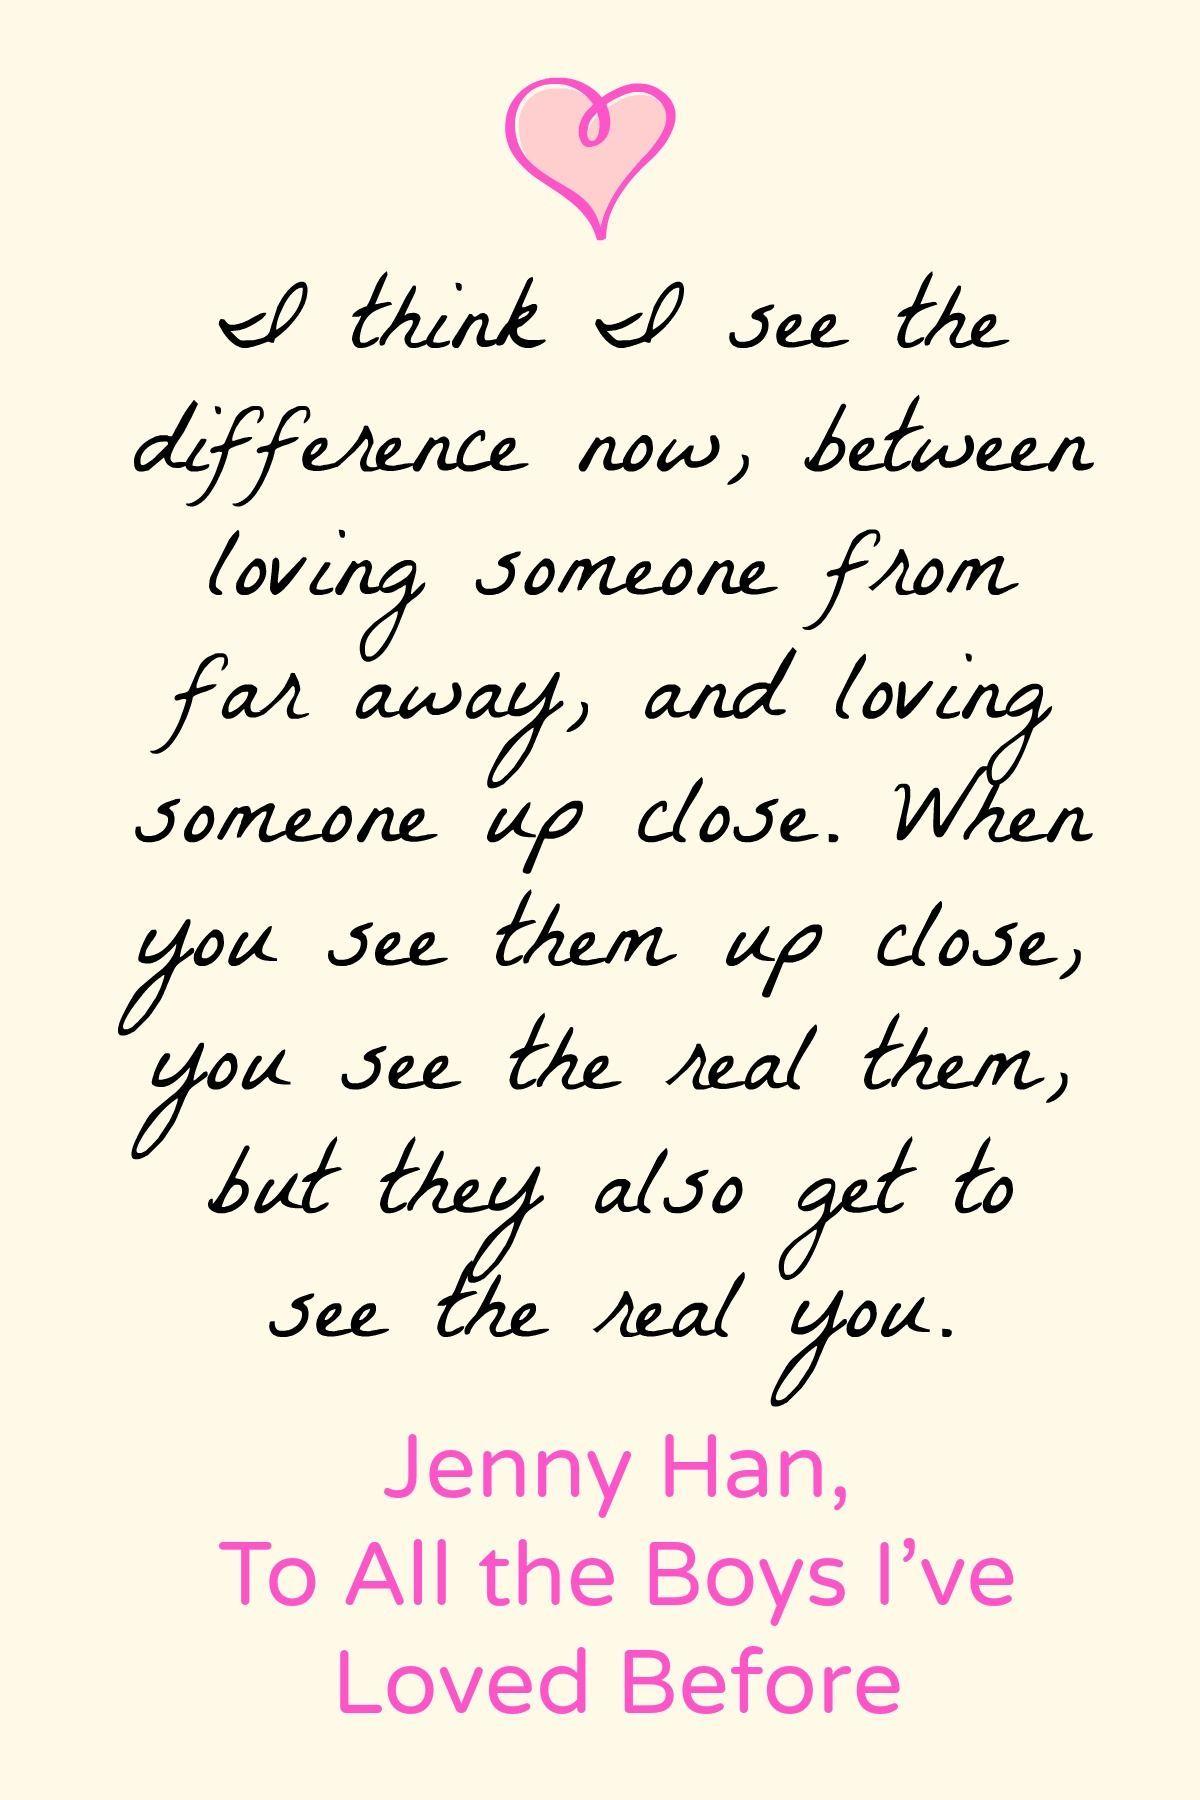 To All the Boys I've Loved Before by Jenny Han. I think I see the difference now, between loving someone from far away, and loving someone up close. When you see them up close, you see the real them, but they also get to see the real you. - To All the Boys I've Loved